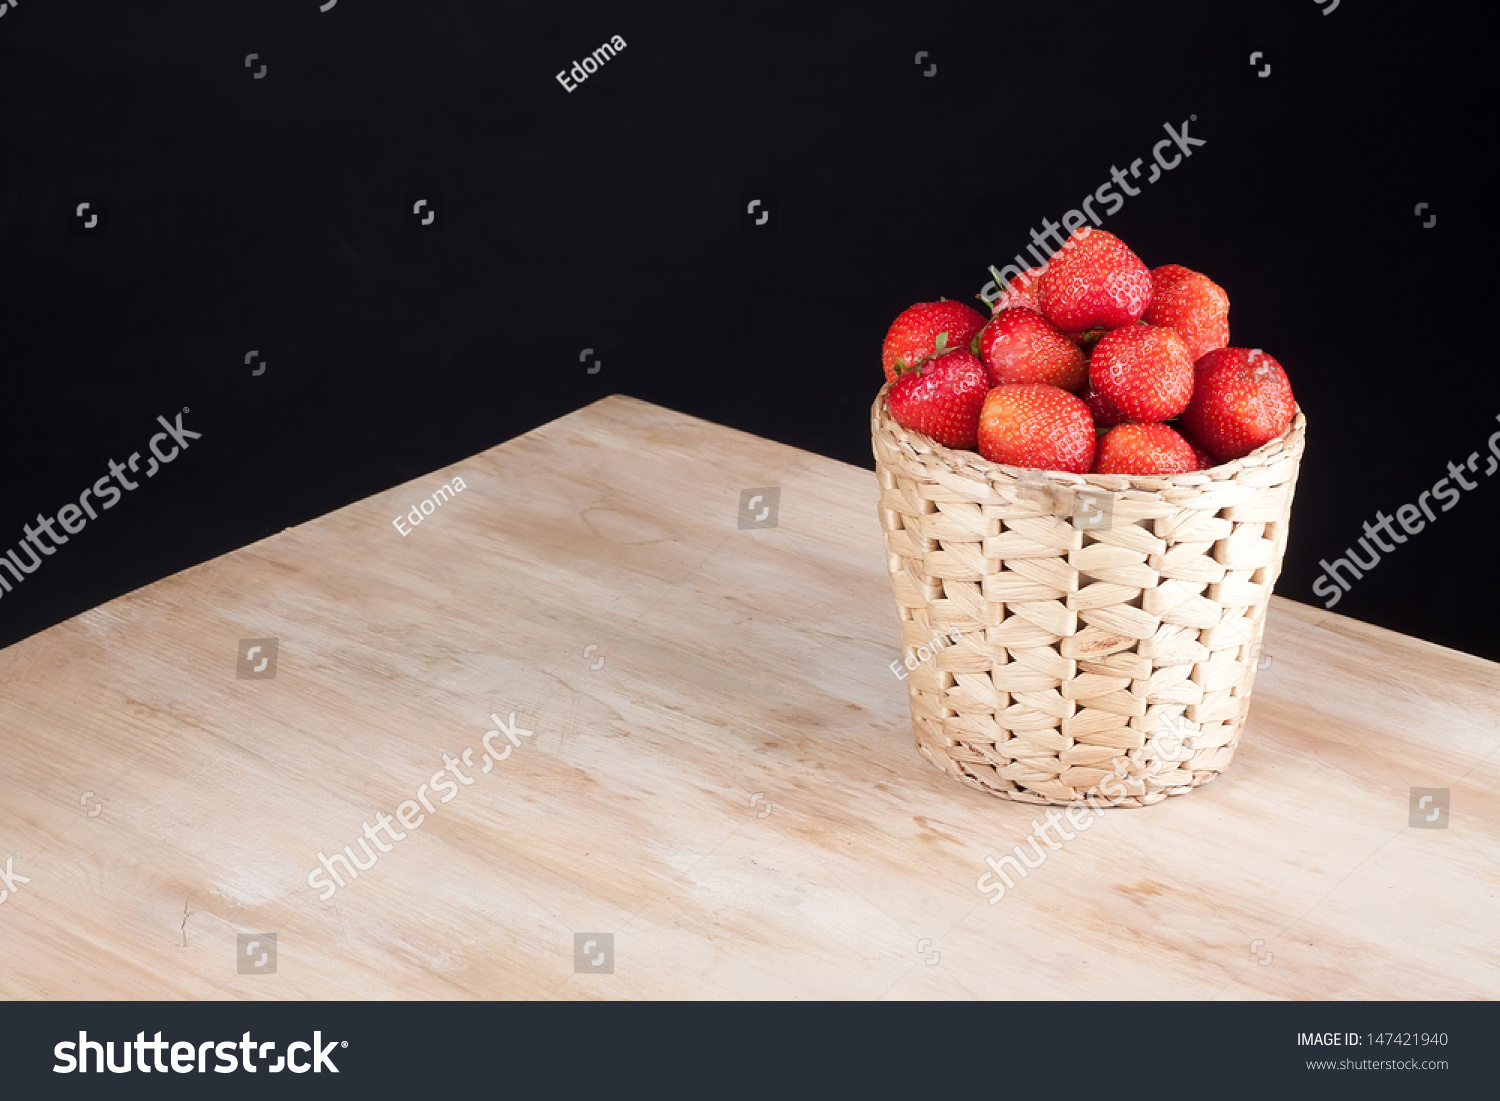 Strawberries in basket on wooden table #147421940